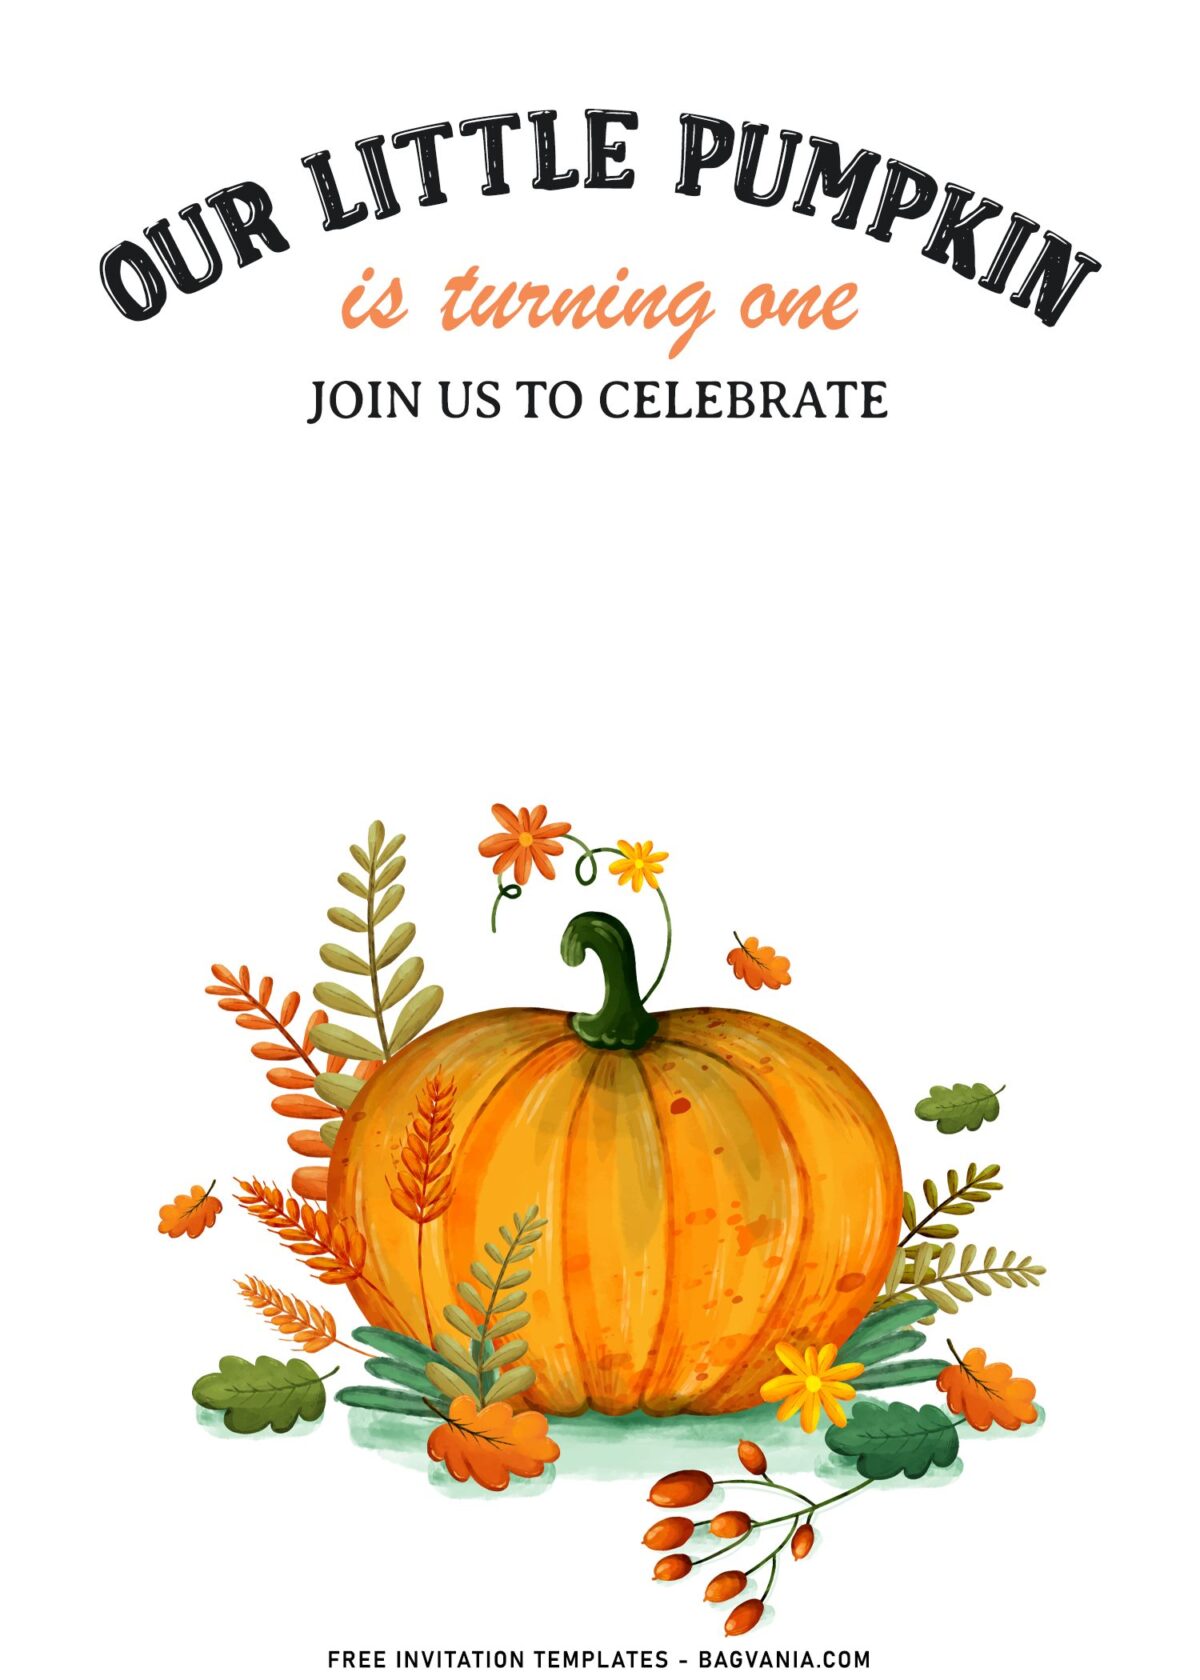 8+ Cute Pumpkin Patch First Birthday Party Invitation Templates with watercolor green fern and mushrooms